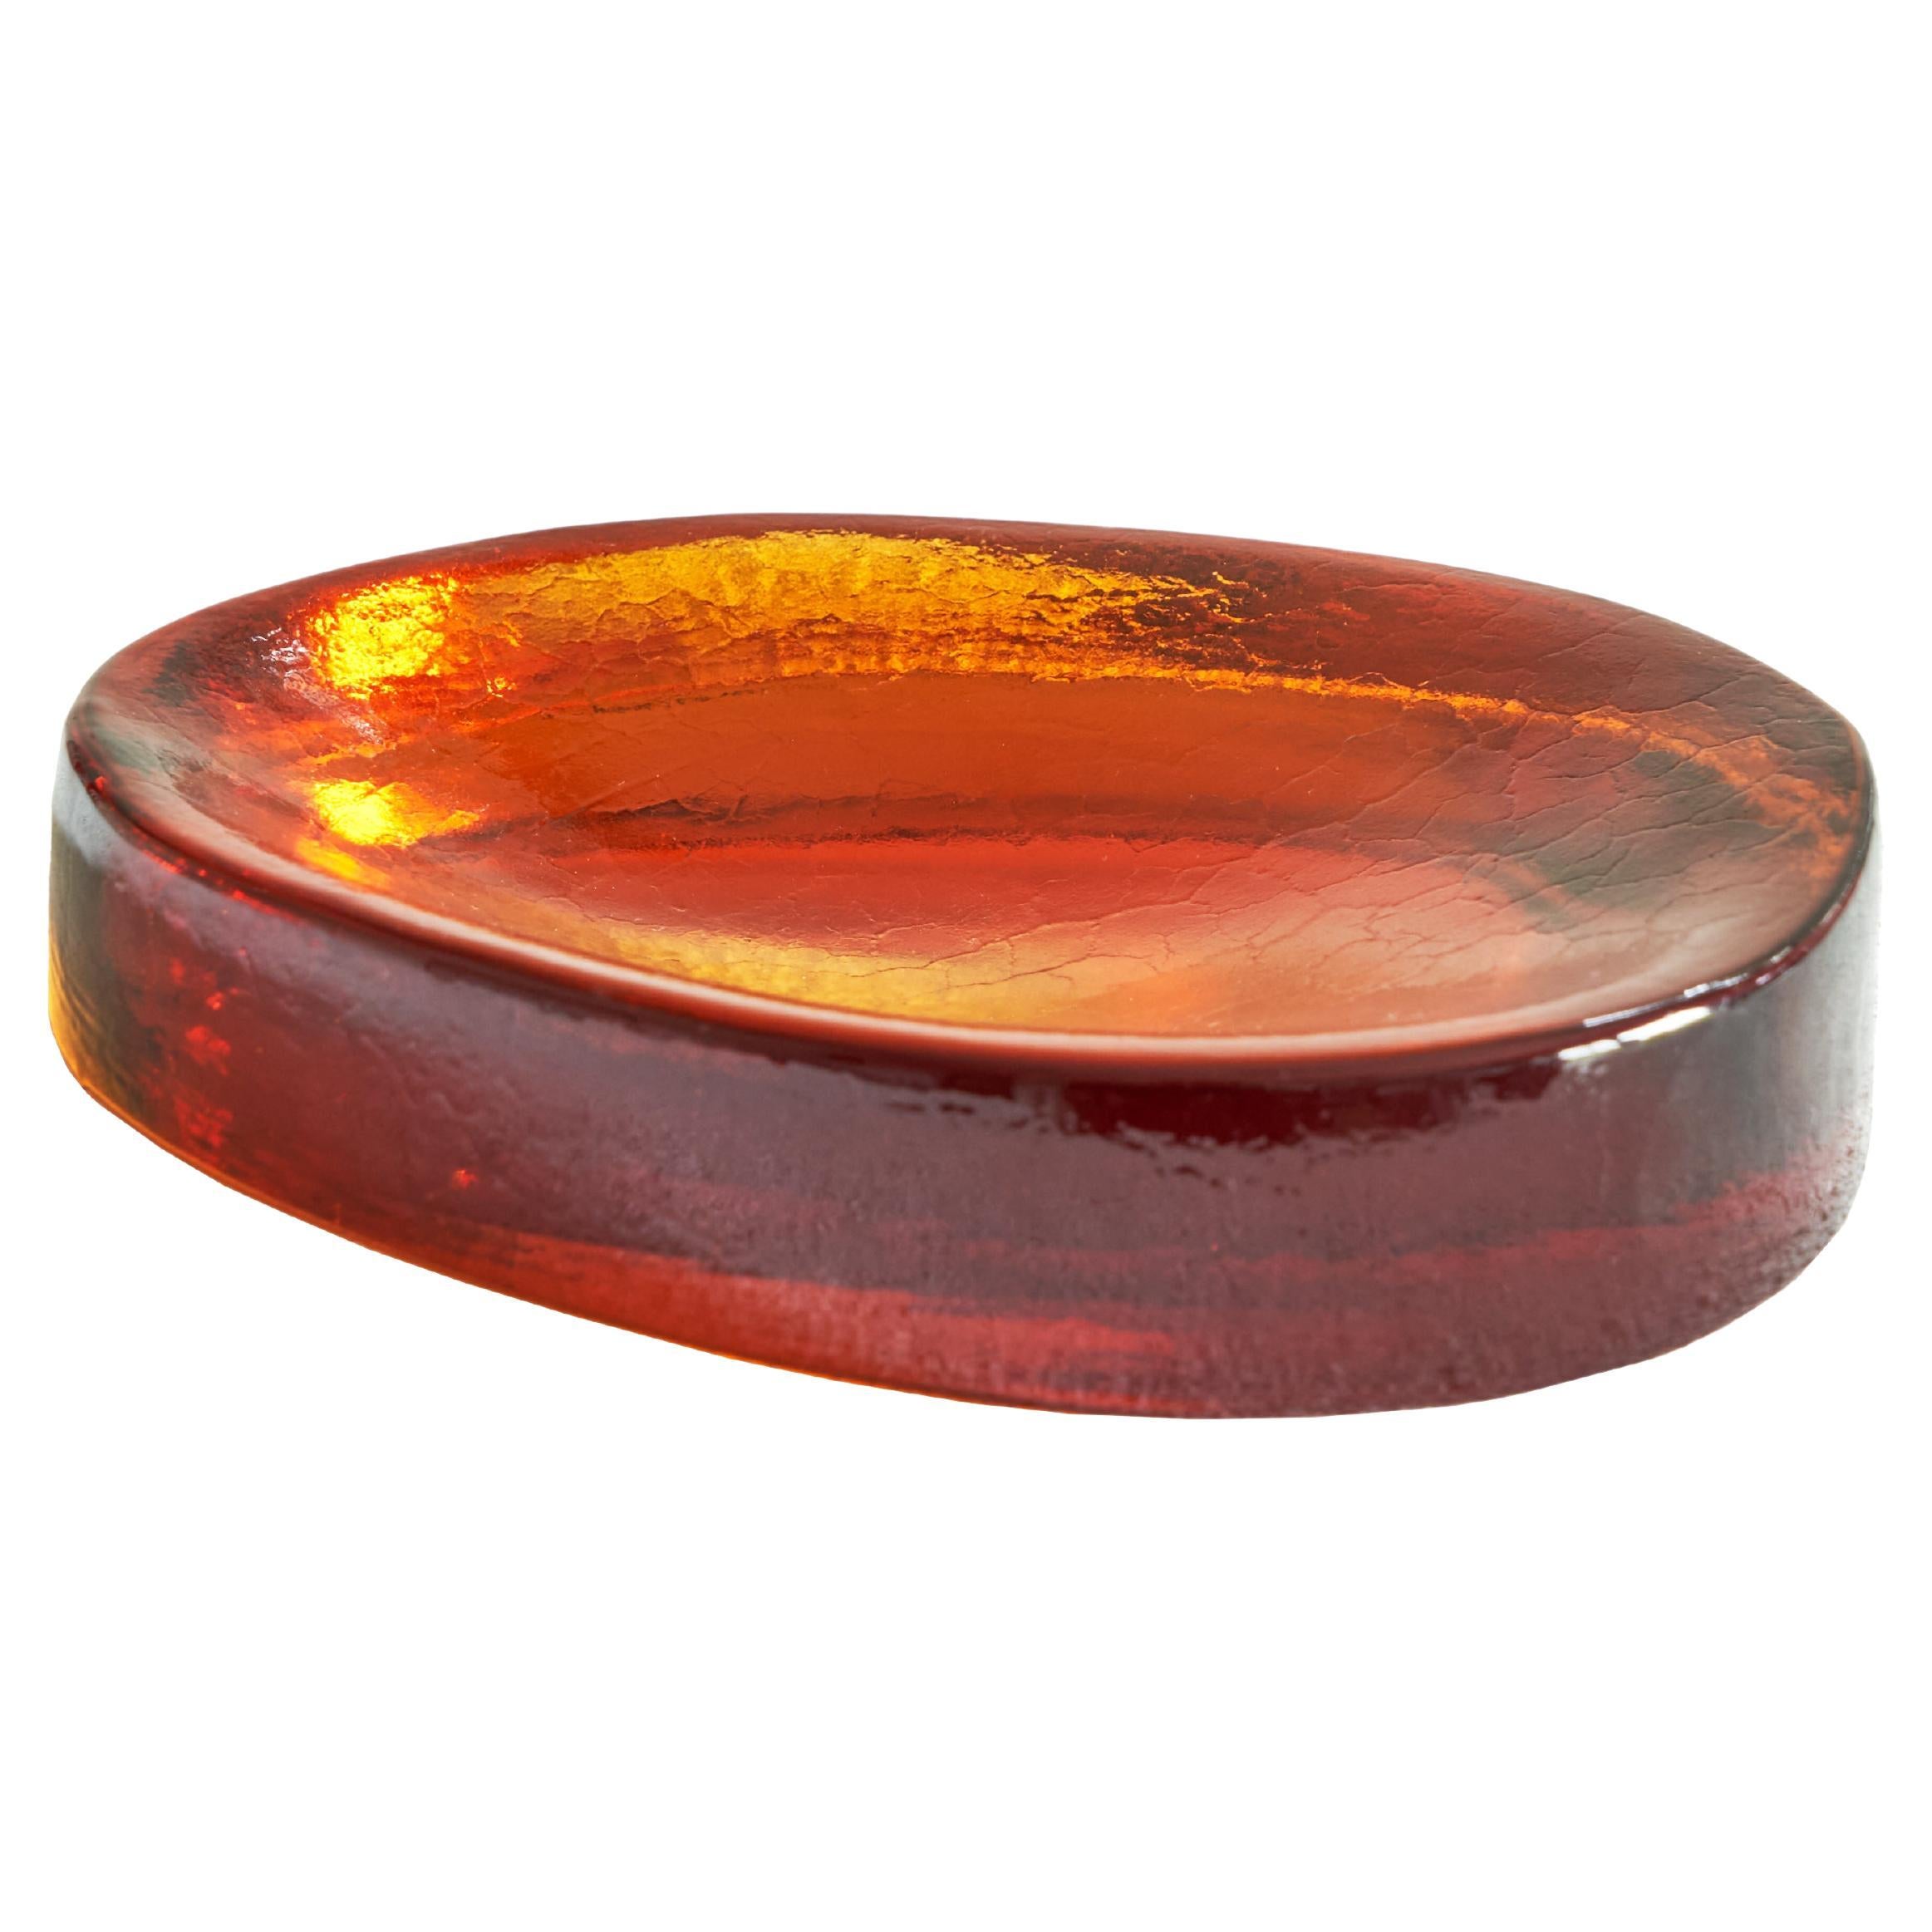 Freeform Concave Amber Colored Vide Poche in Solid Glass, 1960s For Sale